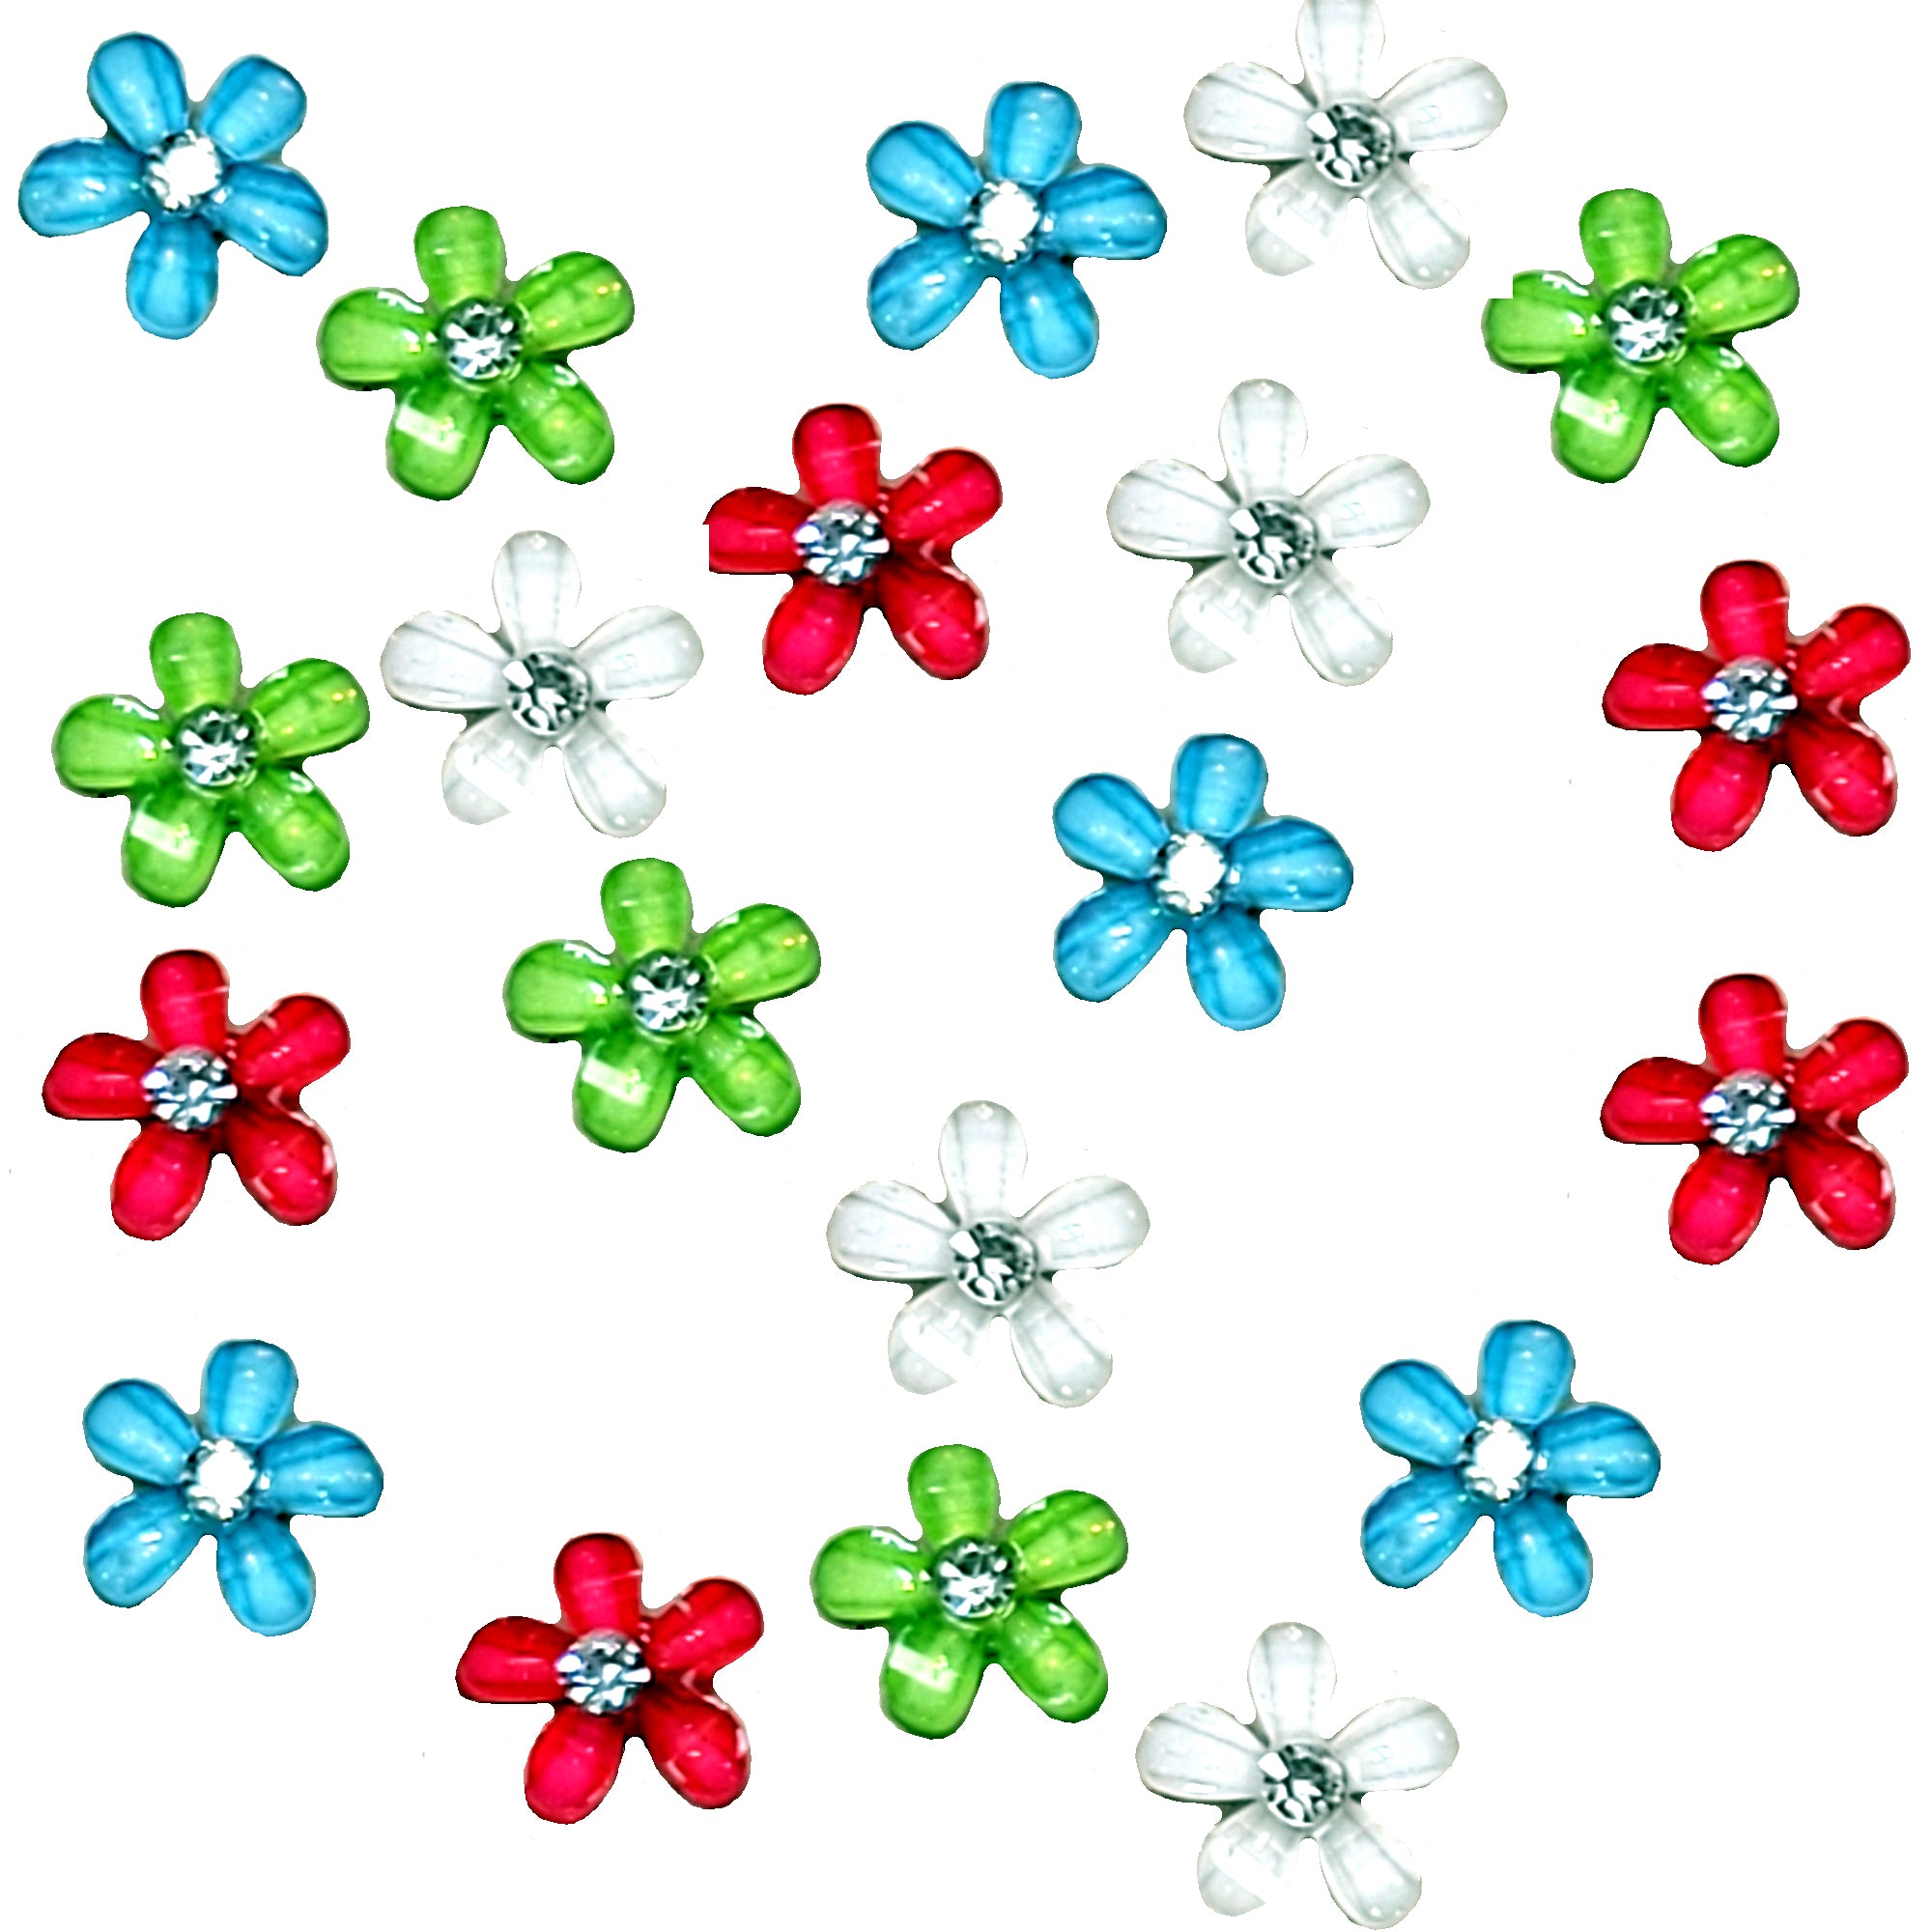 Flower Fun Collection Blue, White, Green & Hot Pink 10mm Flatback Scrapbook Embellishments by SSC Designs - 20 pieces